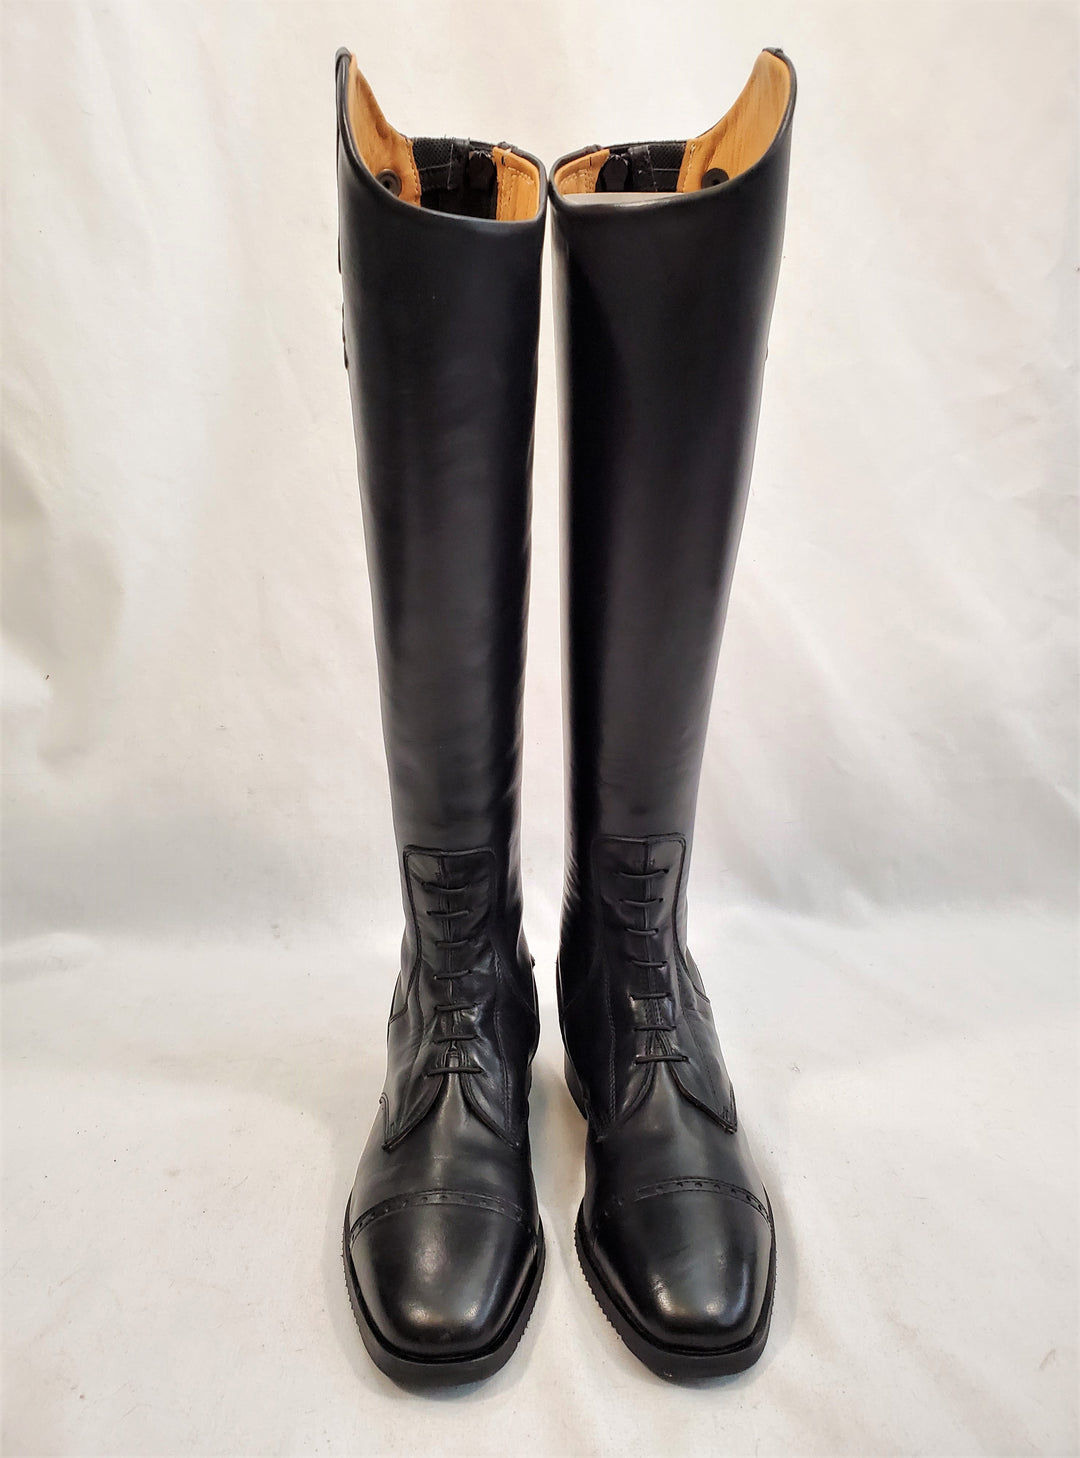 Makebe Talento Field Boots by D.due - 38 TM (US Women's 7.5 Tall Medium) - New!